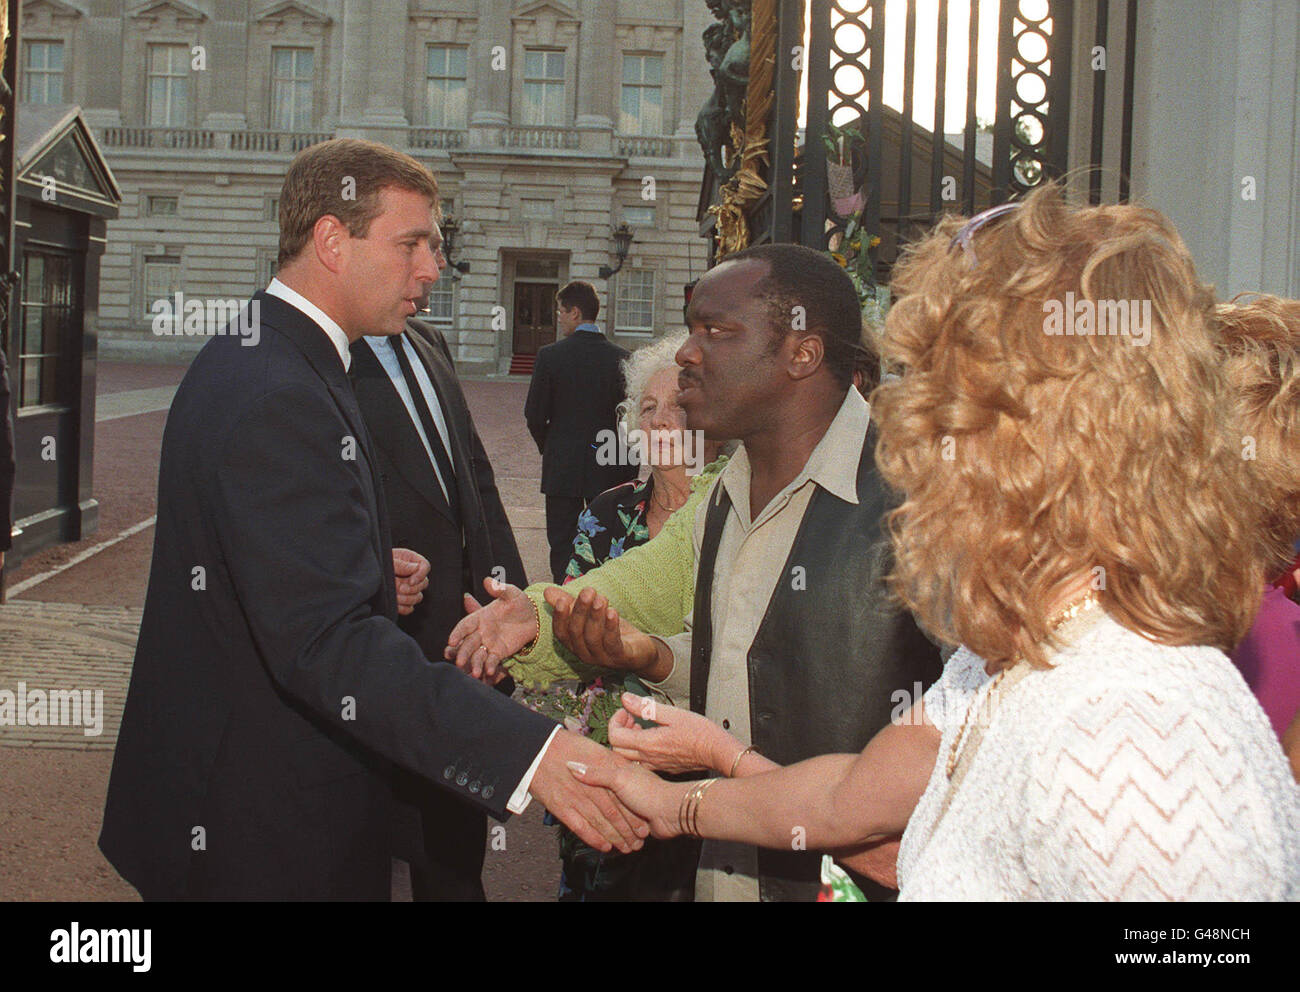 The Duke of York is greeted by wellwishers paying tribute to Diana, Princess of Wales, on his arrival at Buckingham Palace today (Thursday). Photo by John Stillwell/PA Stock Photo